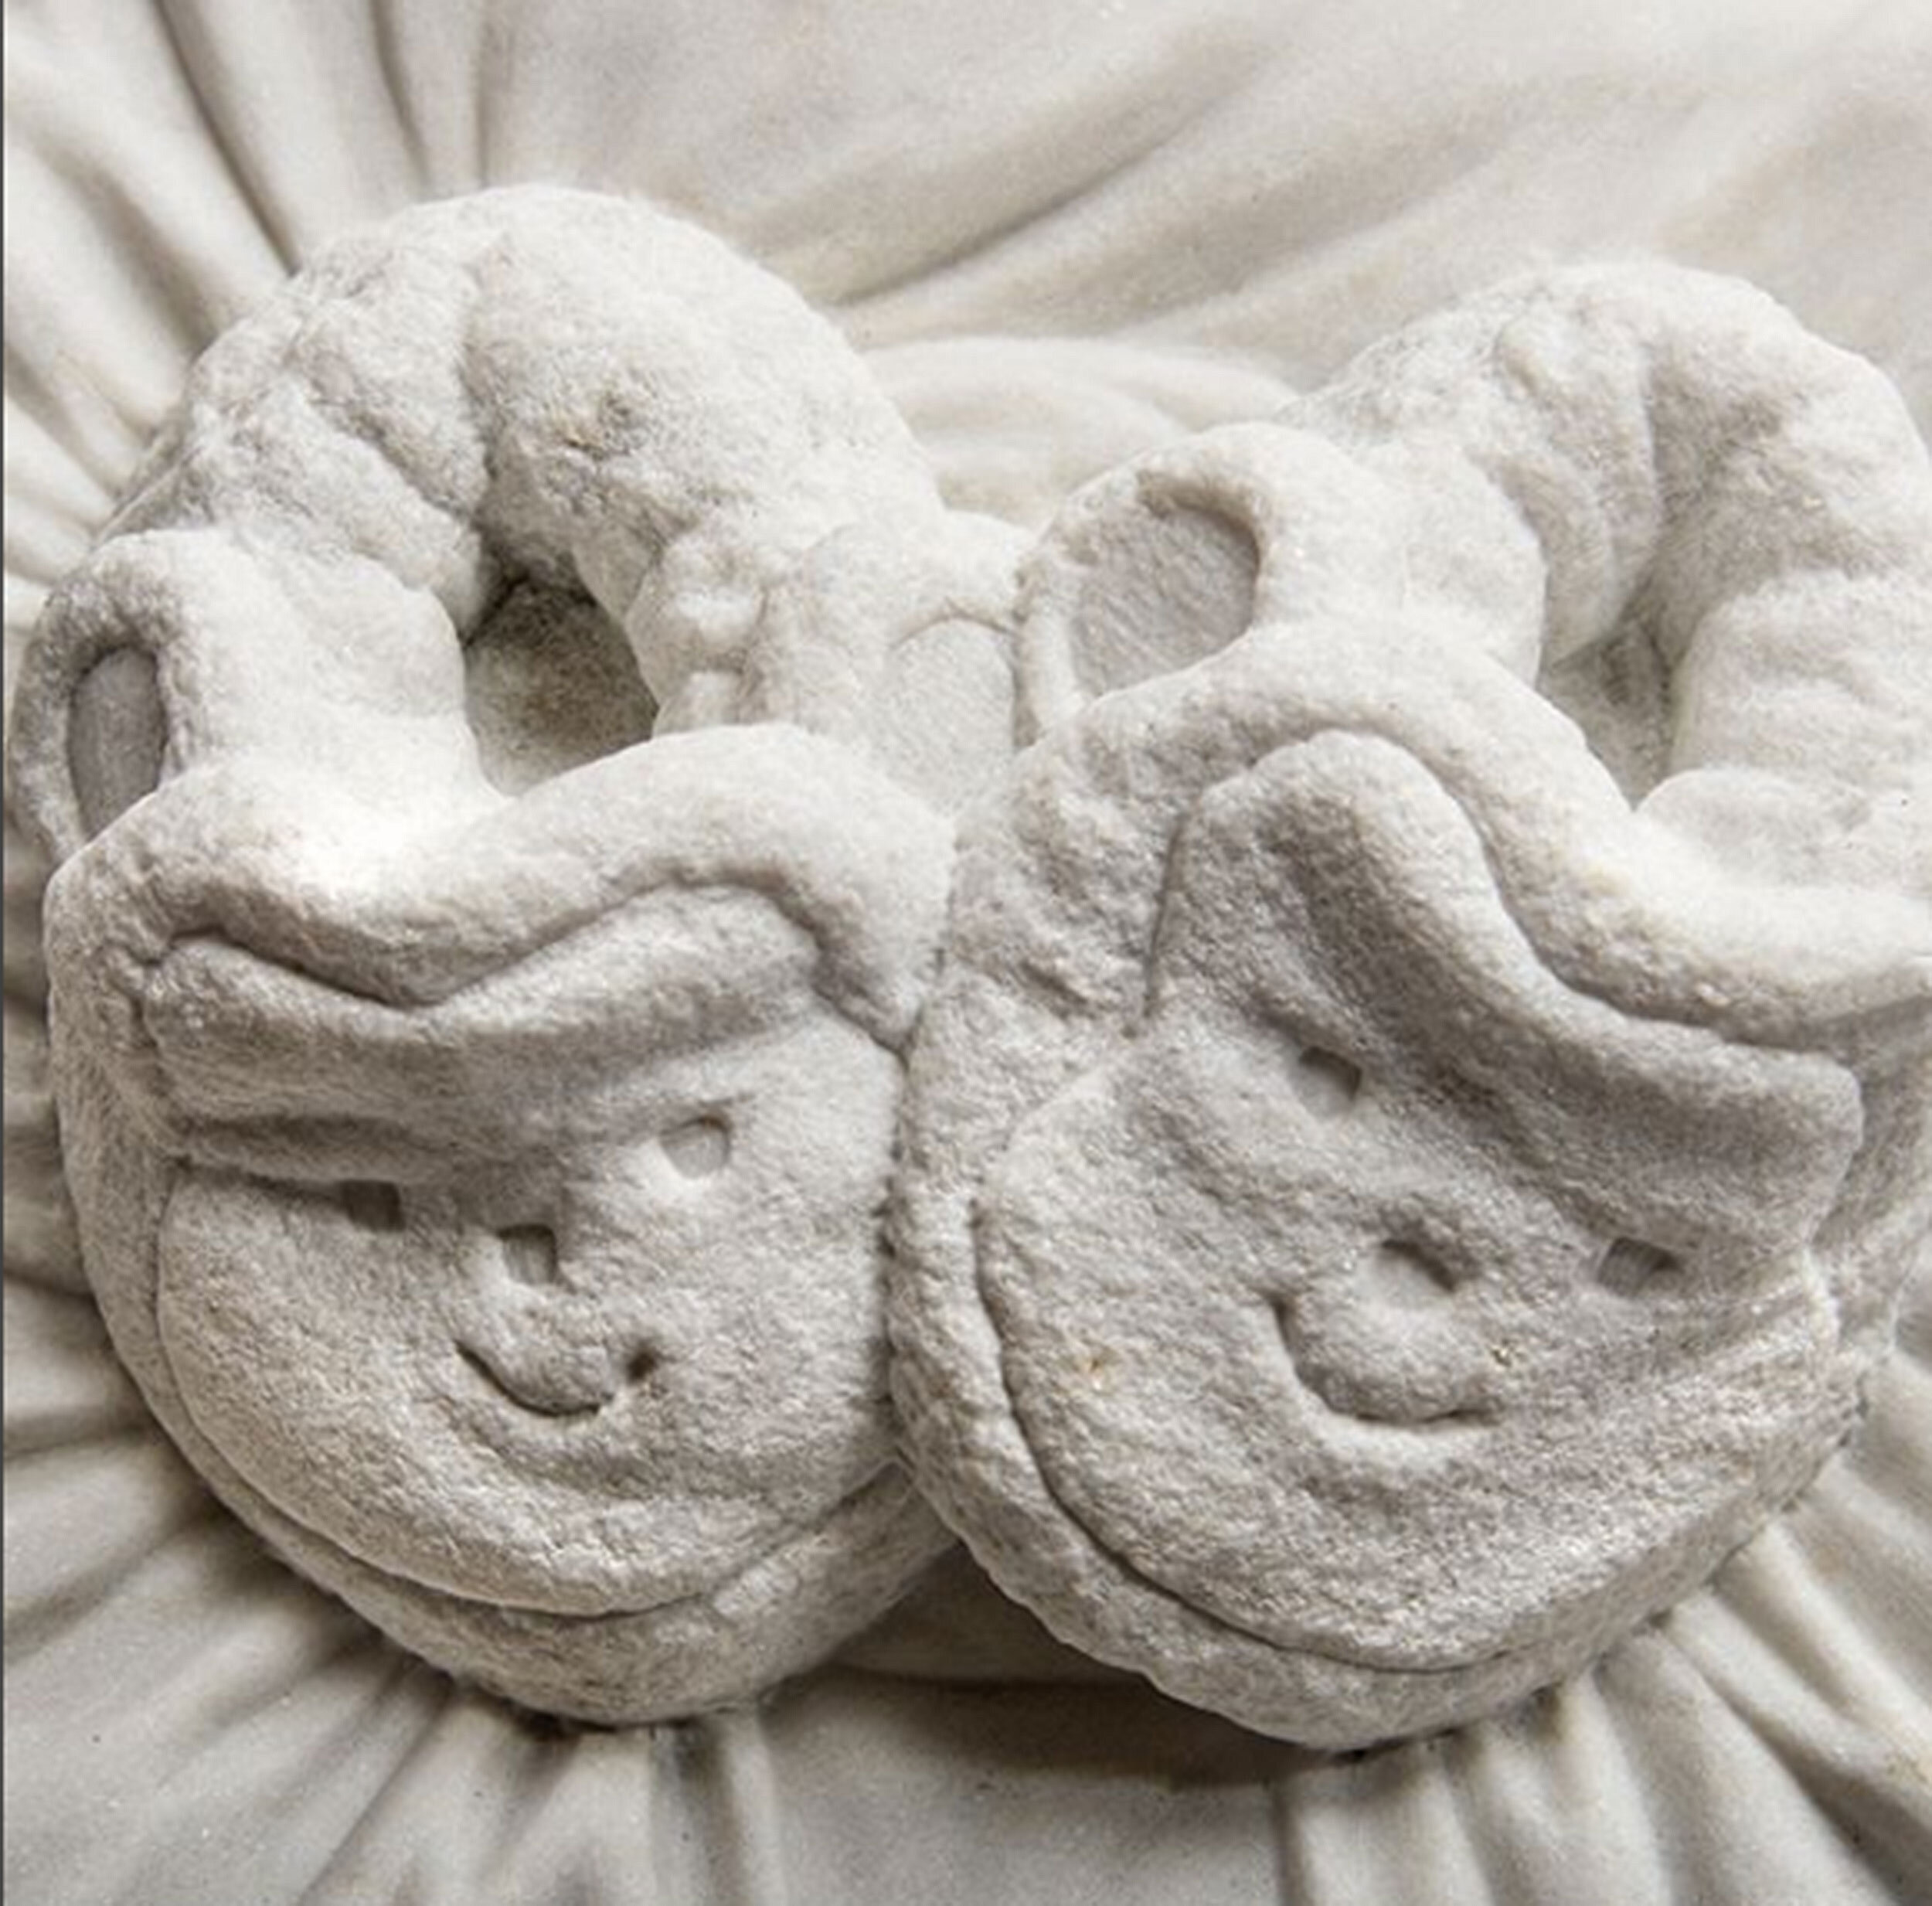 Hand-carved marble slippers sculpted by Sebastian Martorana.